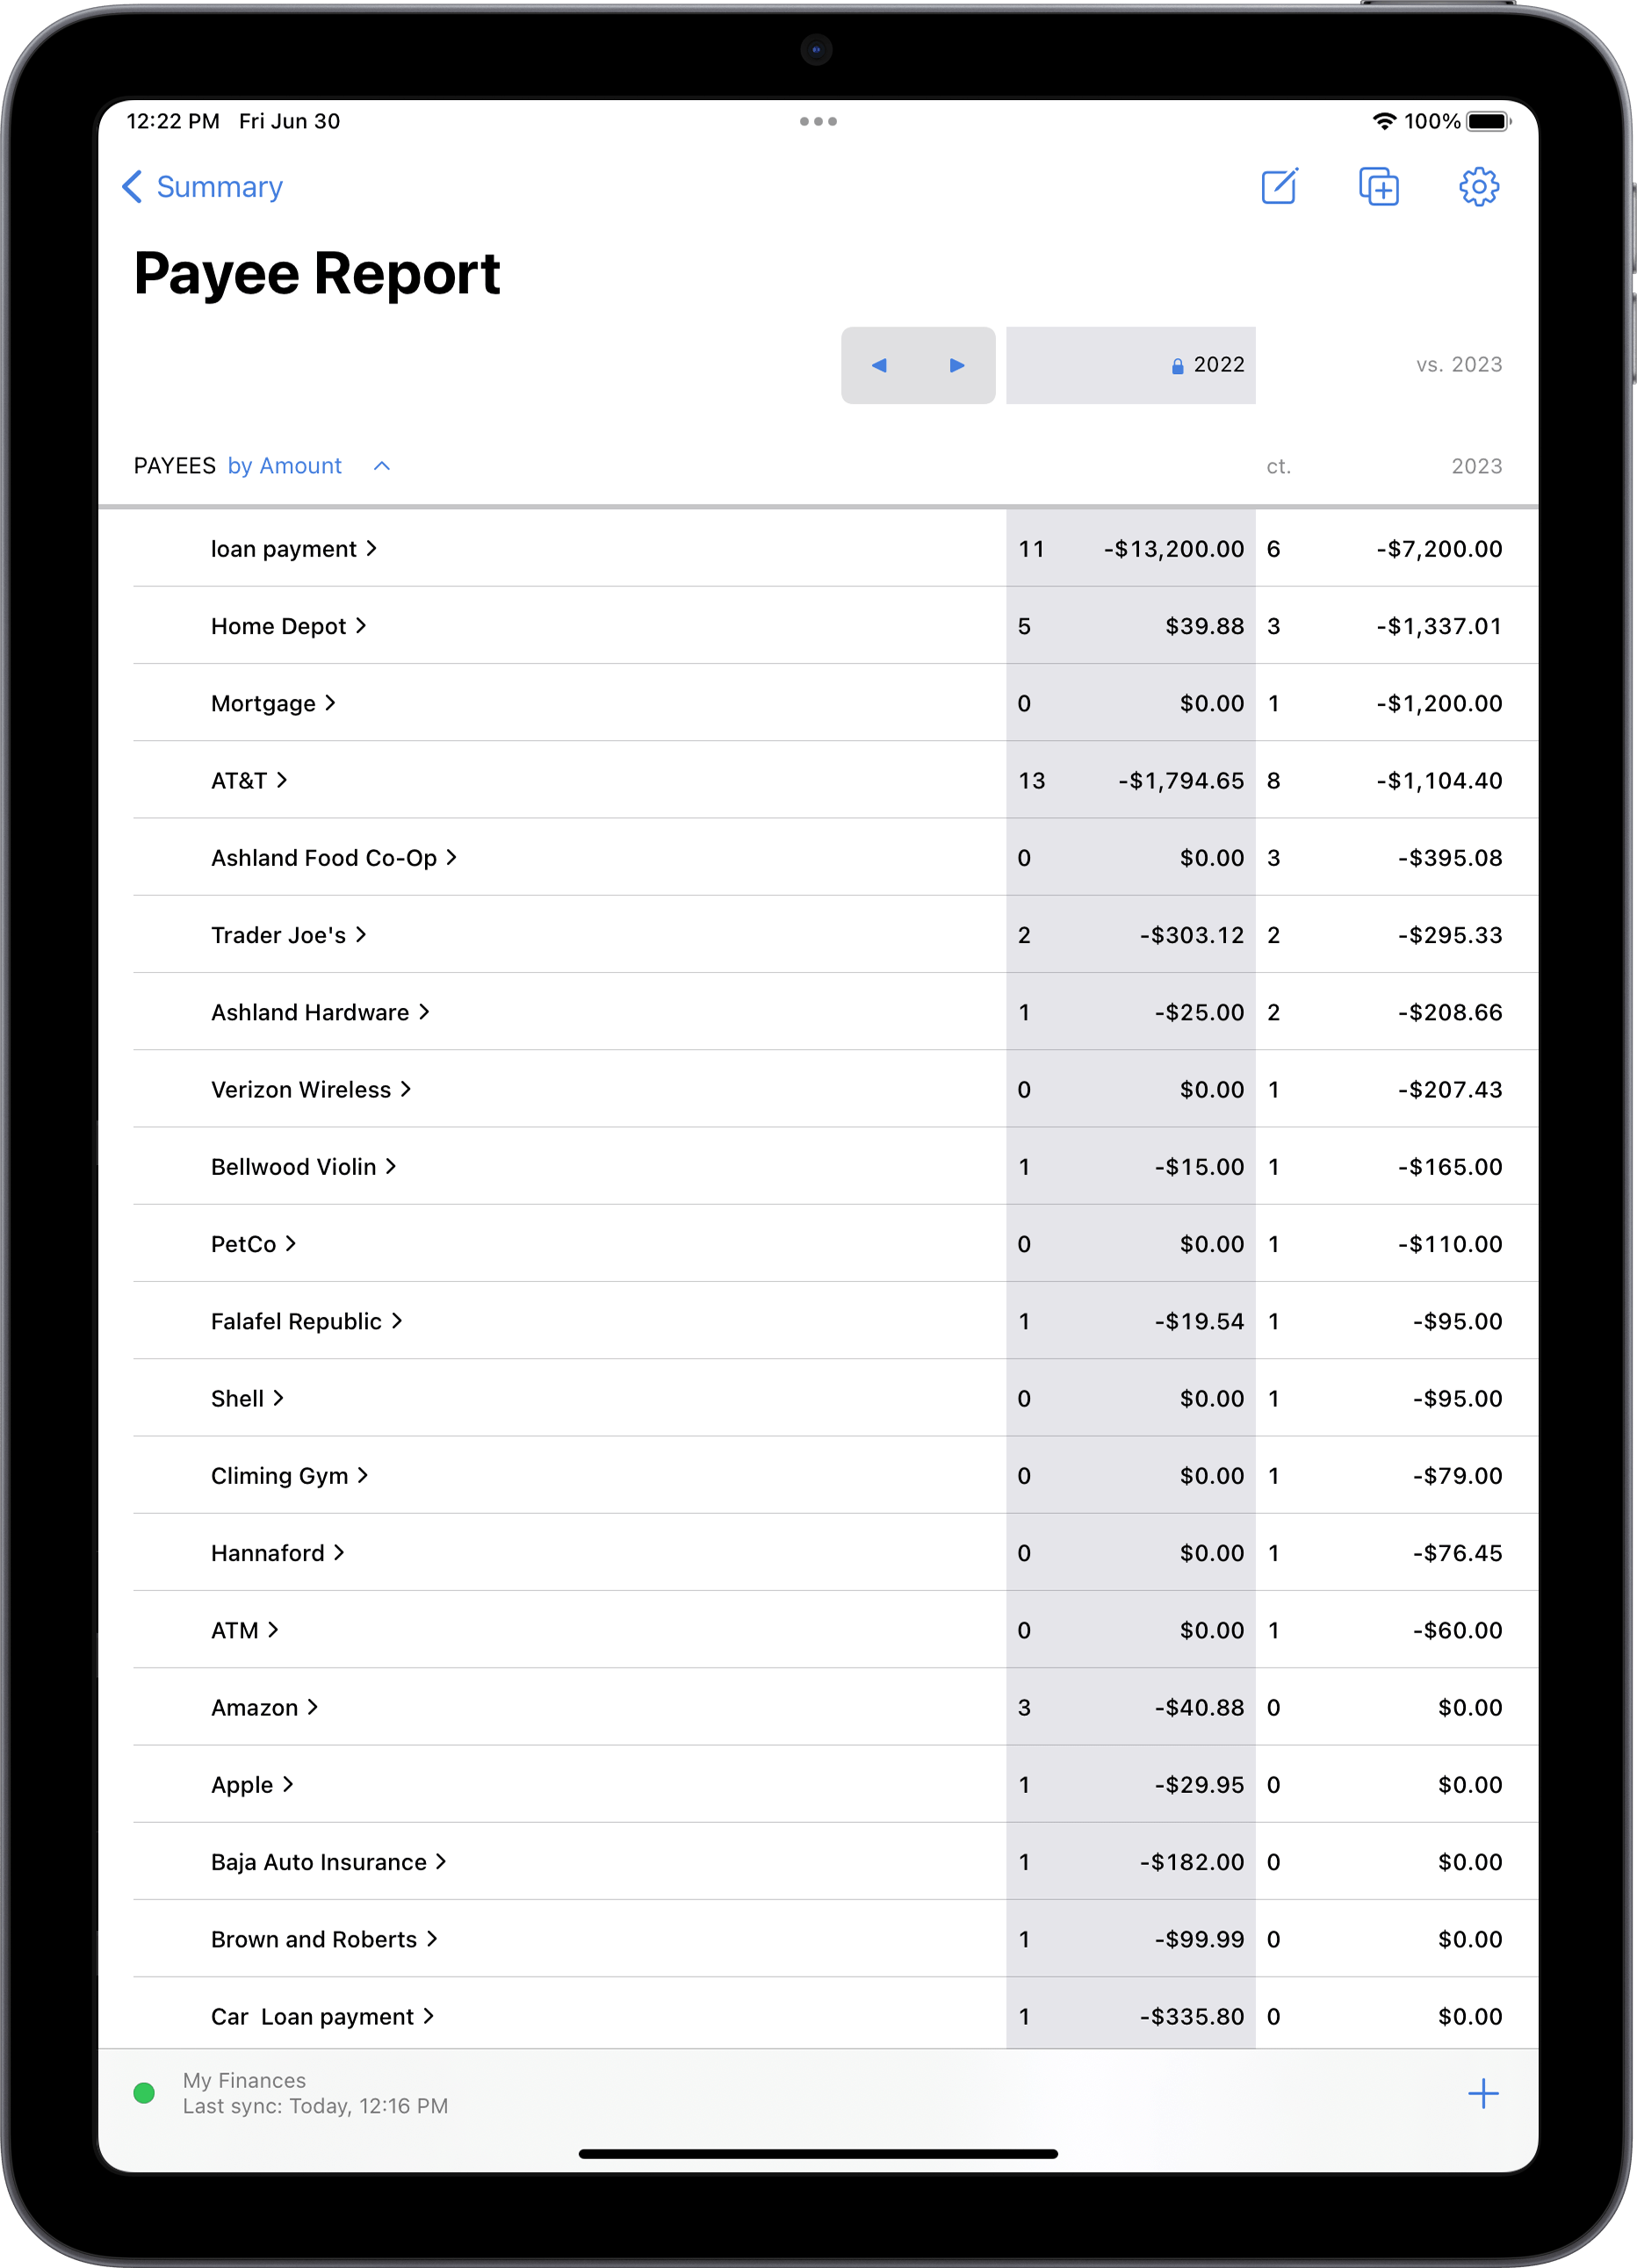 Payee report in portrait mode on iPad